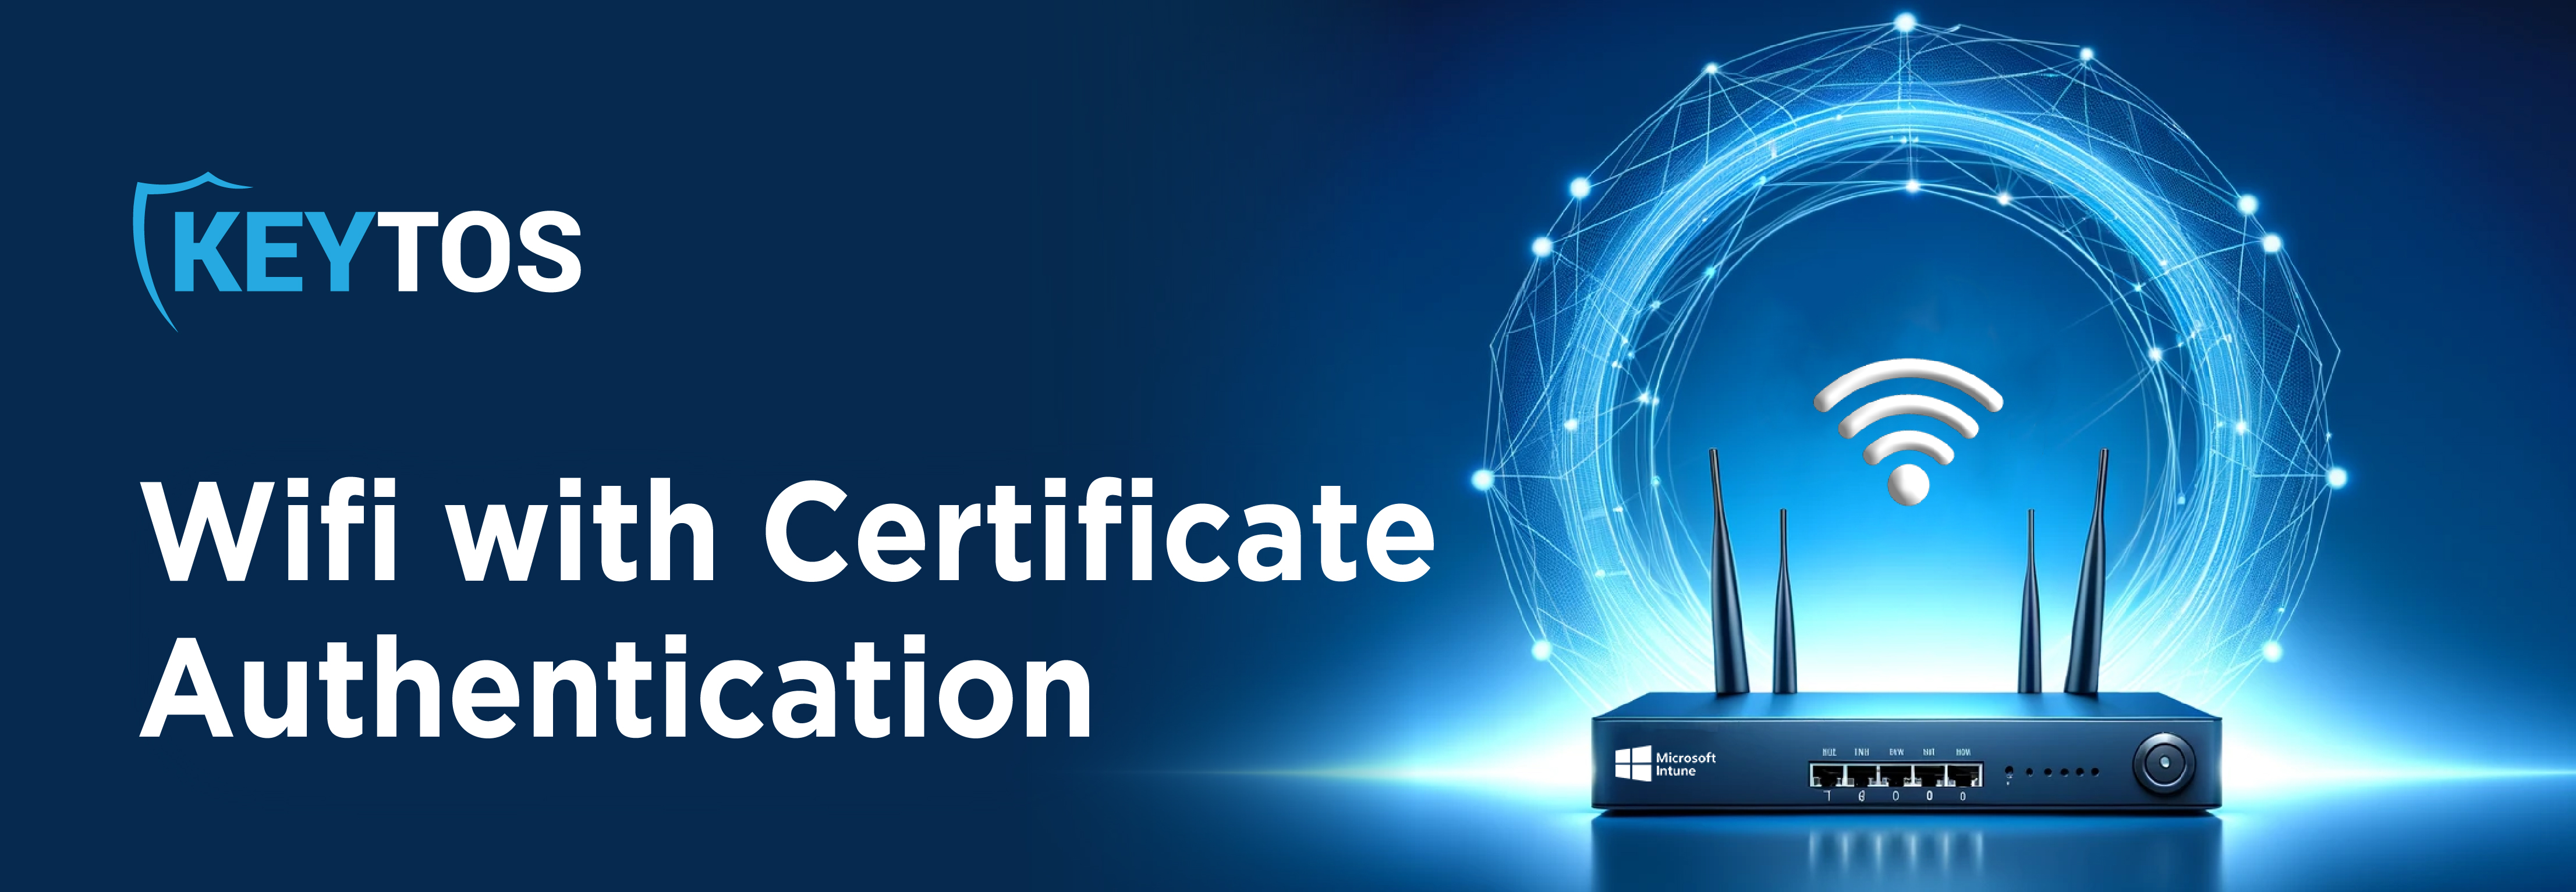 How to Setup Wi-Fi Authentication with X509 Certificates and EAP-TLS RADIUS